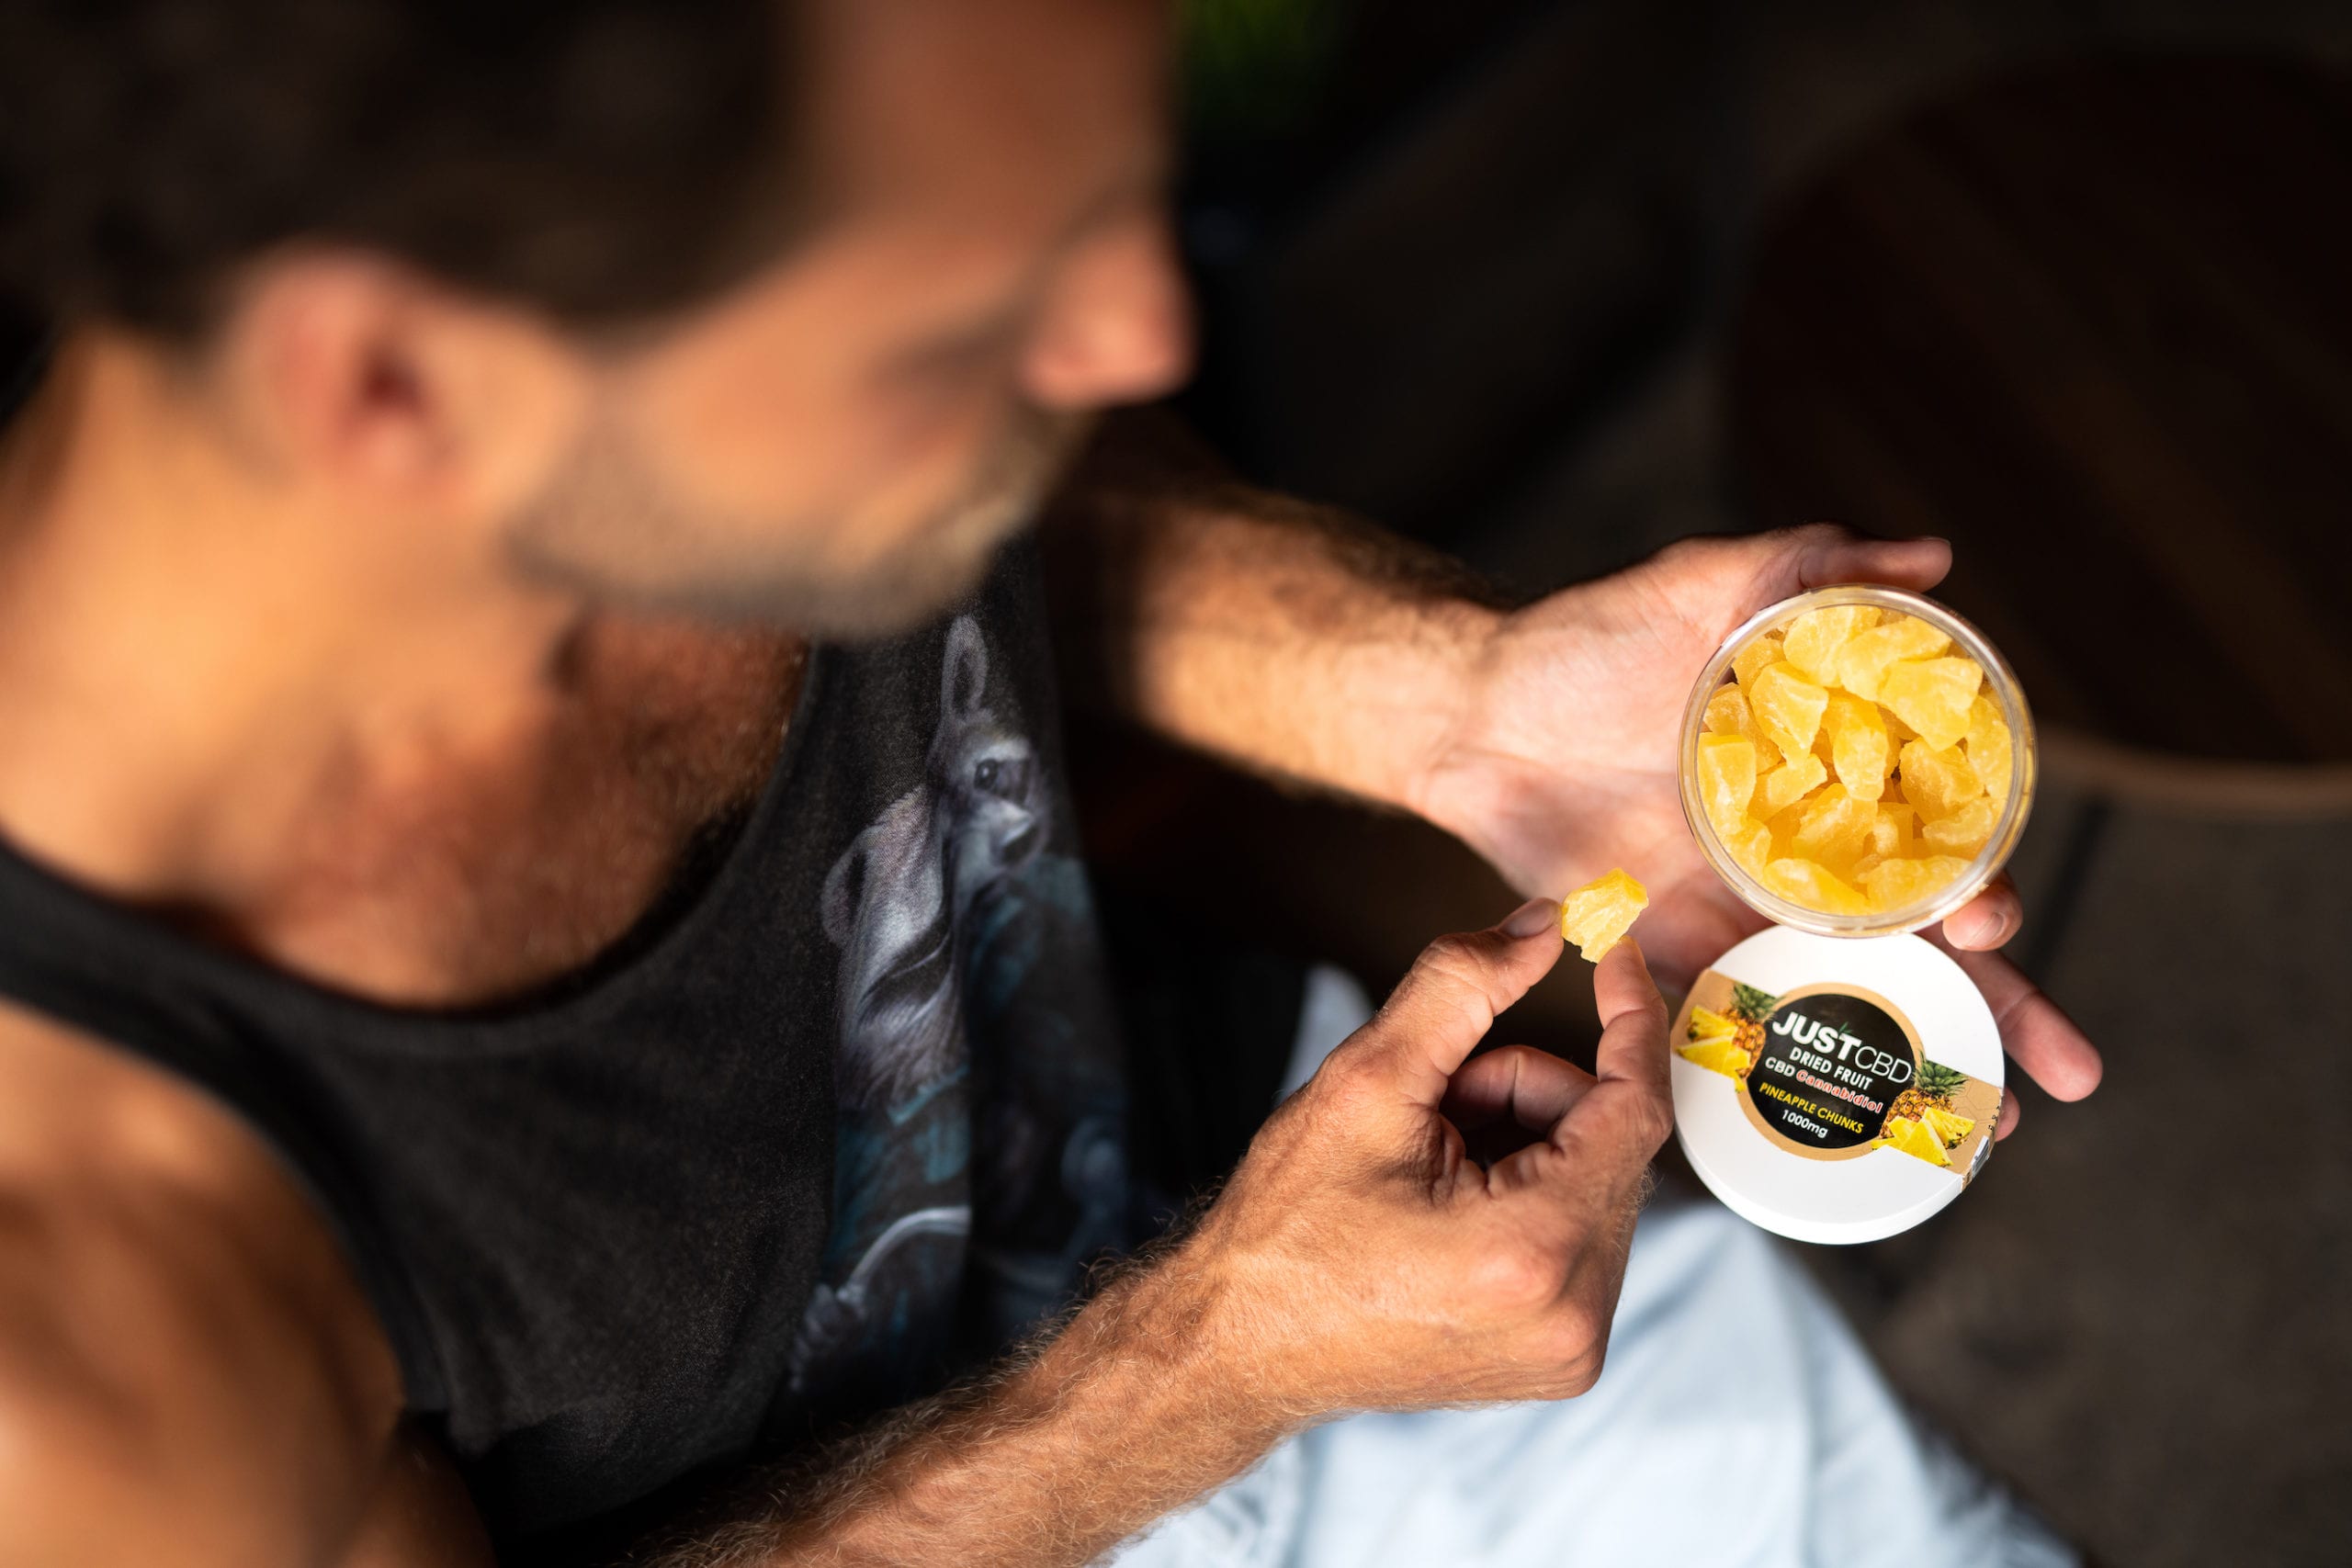 Overhead view of a man taking a pineapple chunk from JUSTCPD dried fruit container